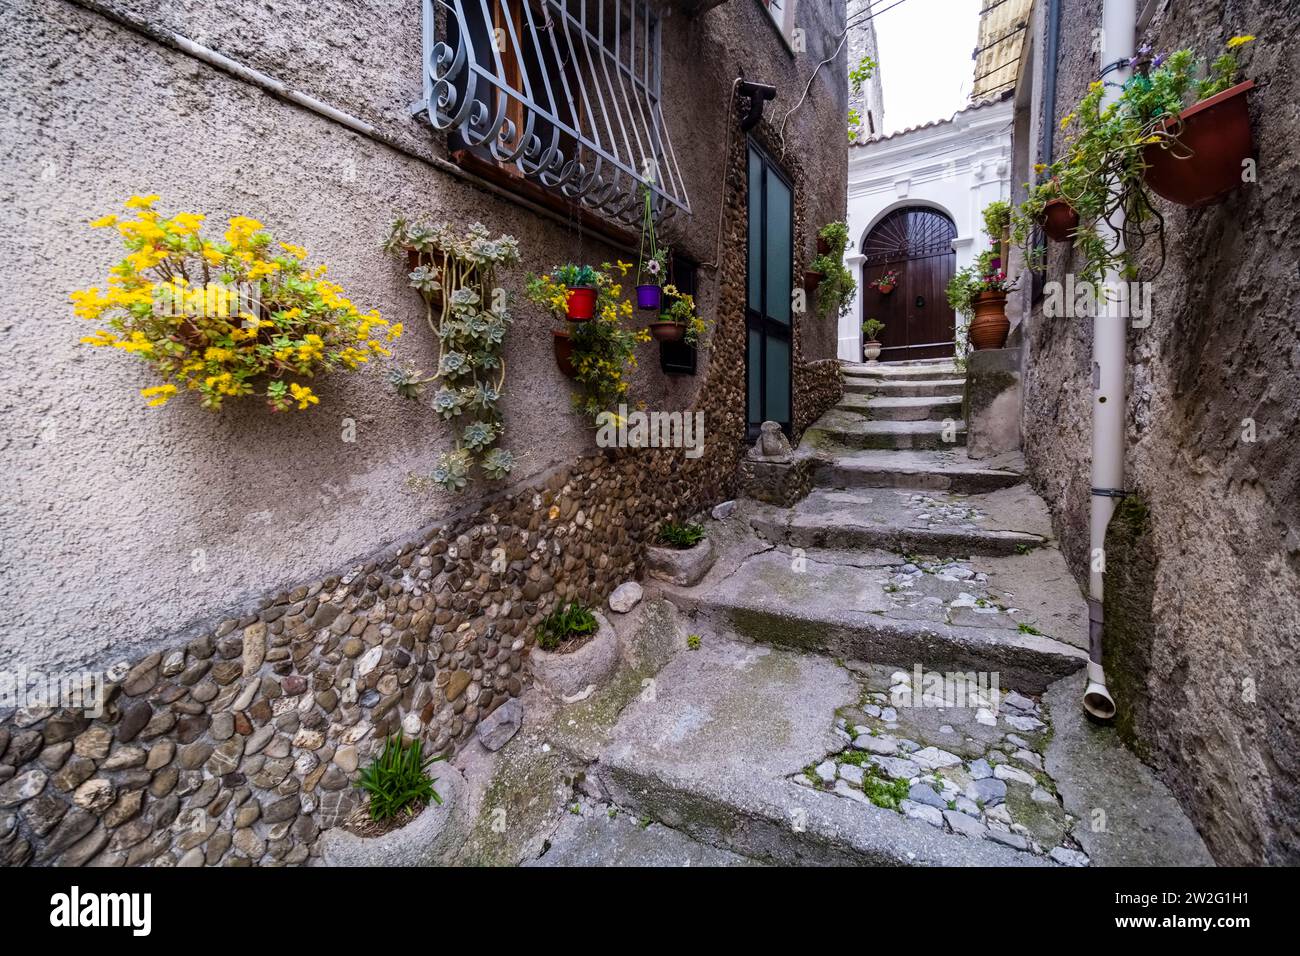 Narrow alley in the town of Morano Calabro, decorated with blooming flowers in pots. Stock Photo